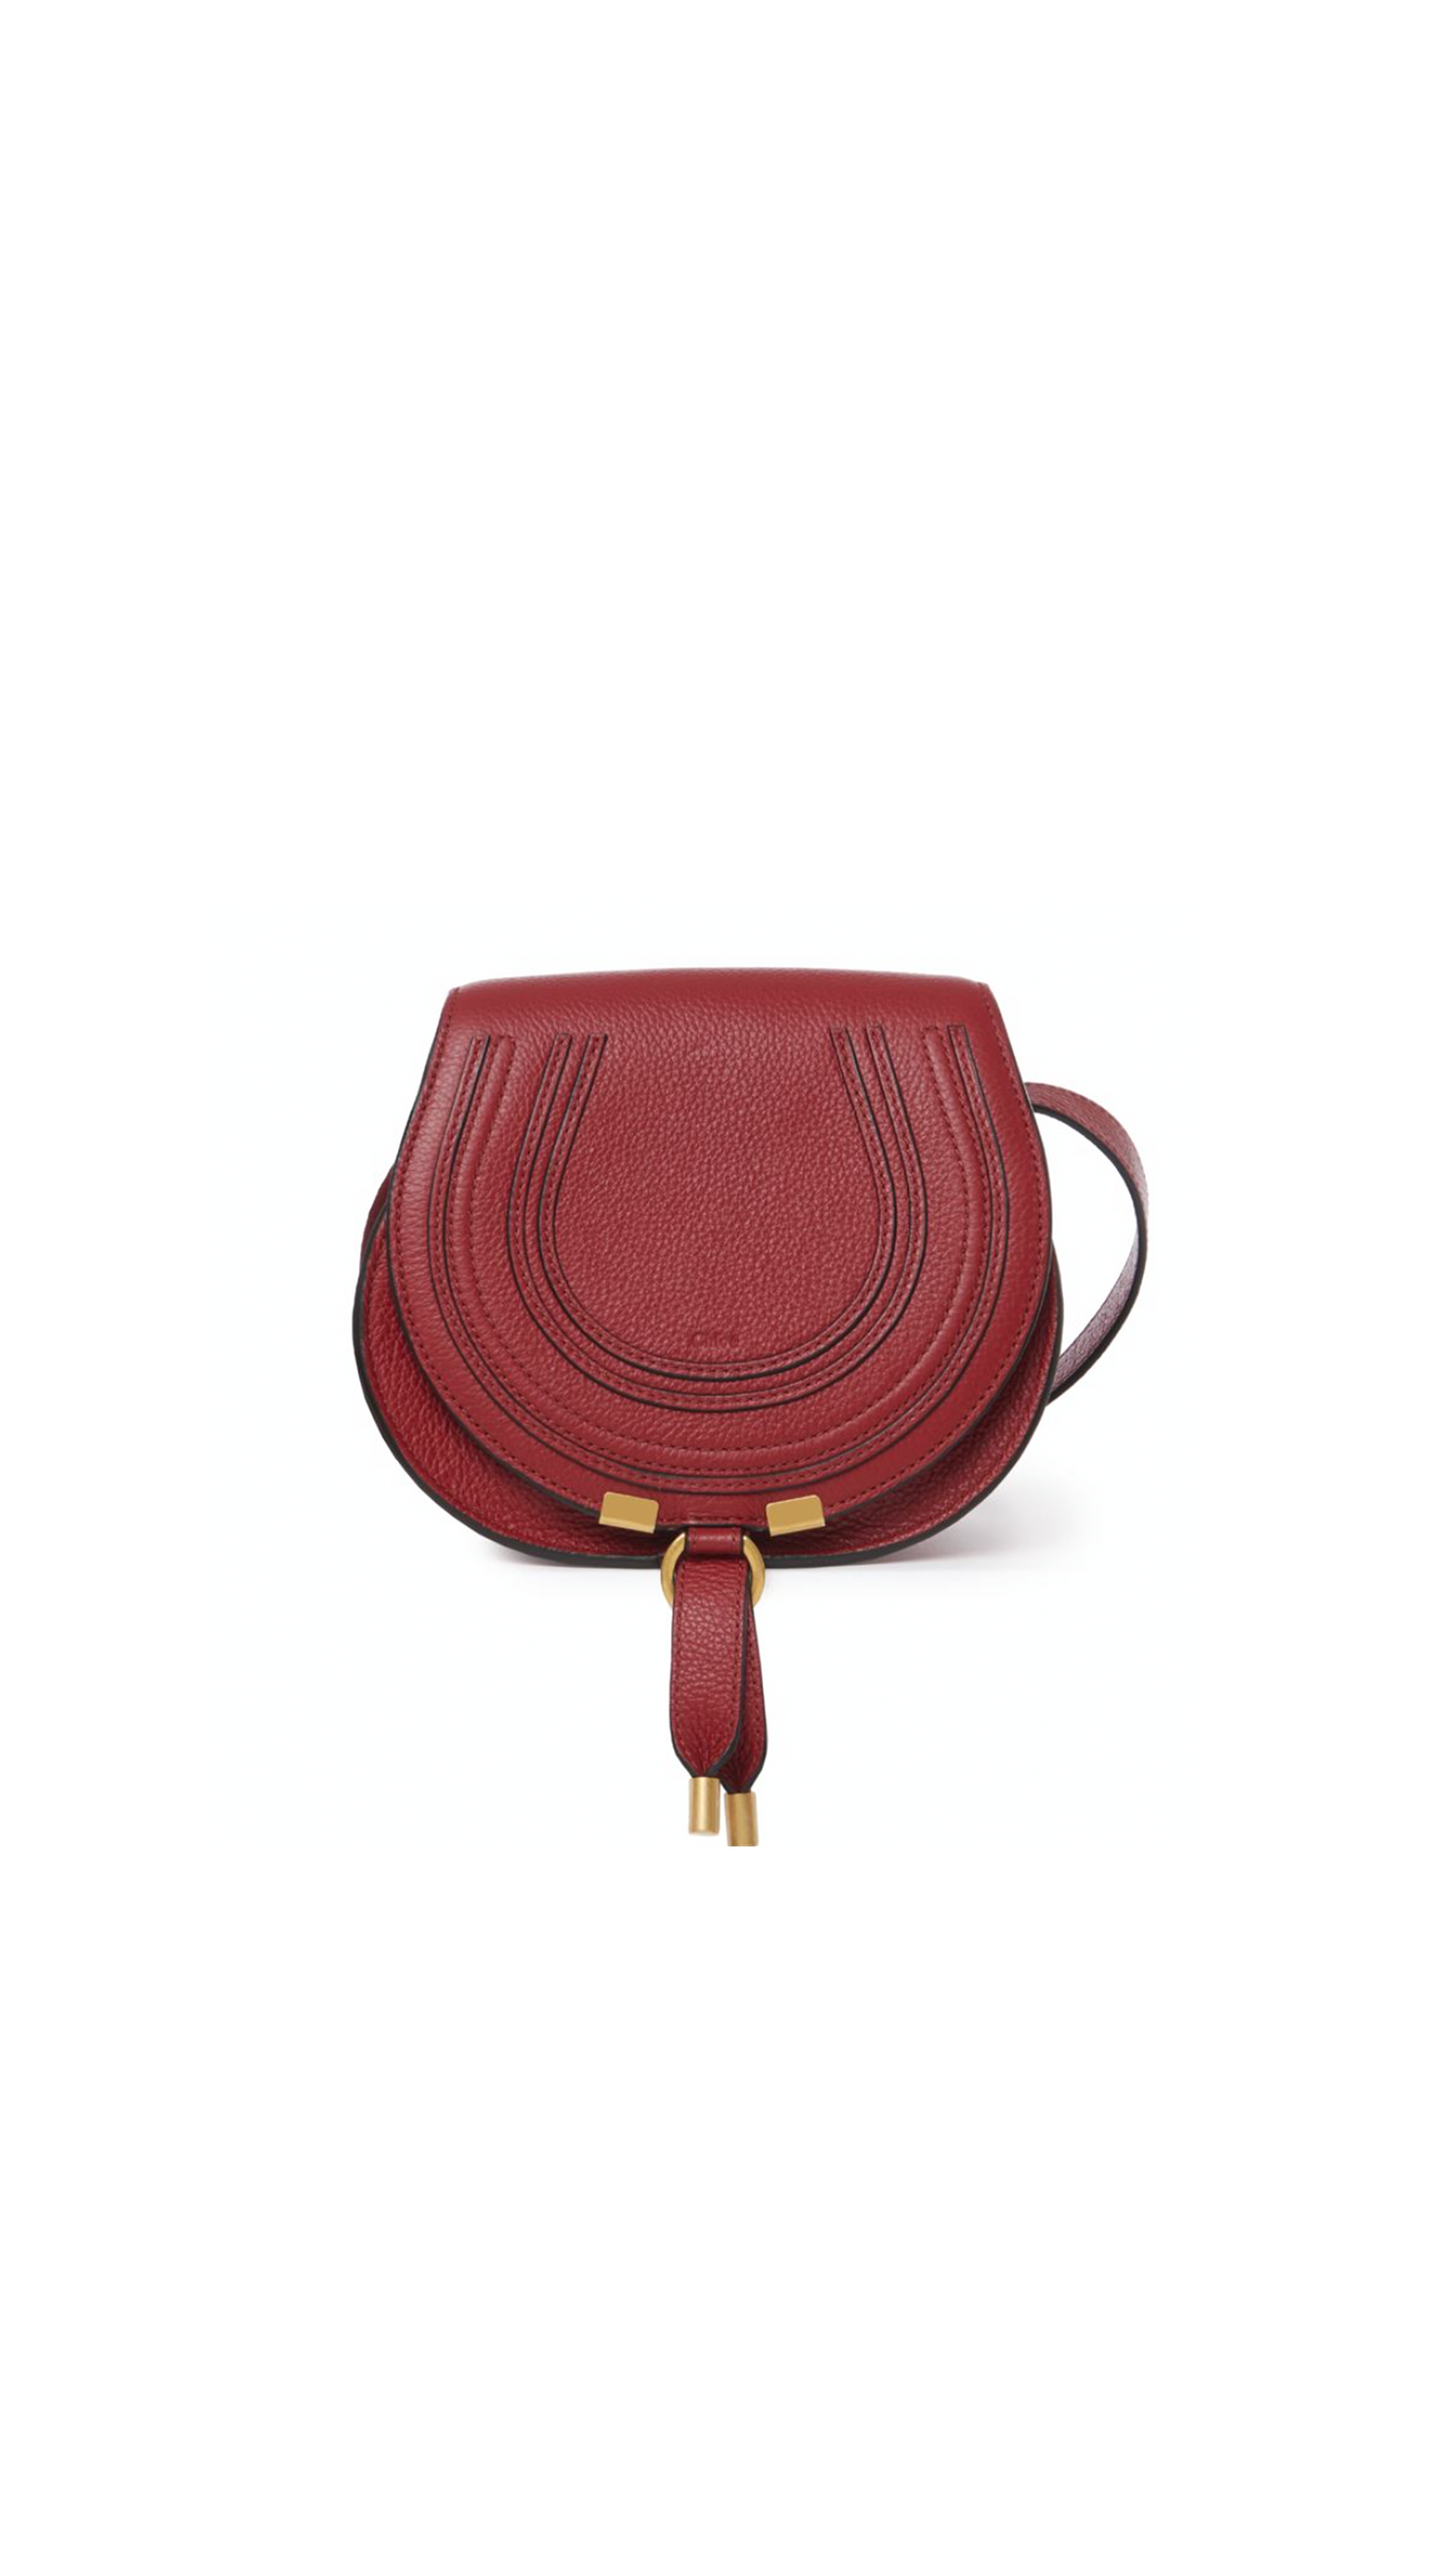 Mini Marcie Saddle Bag in Grained Calfskin - Smoked Red